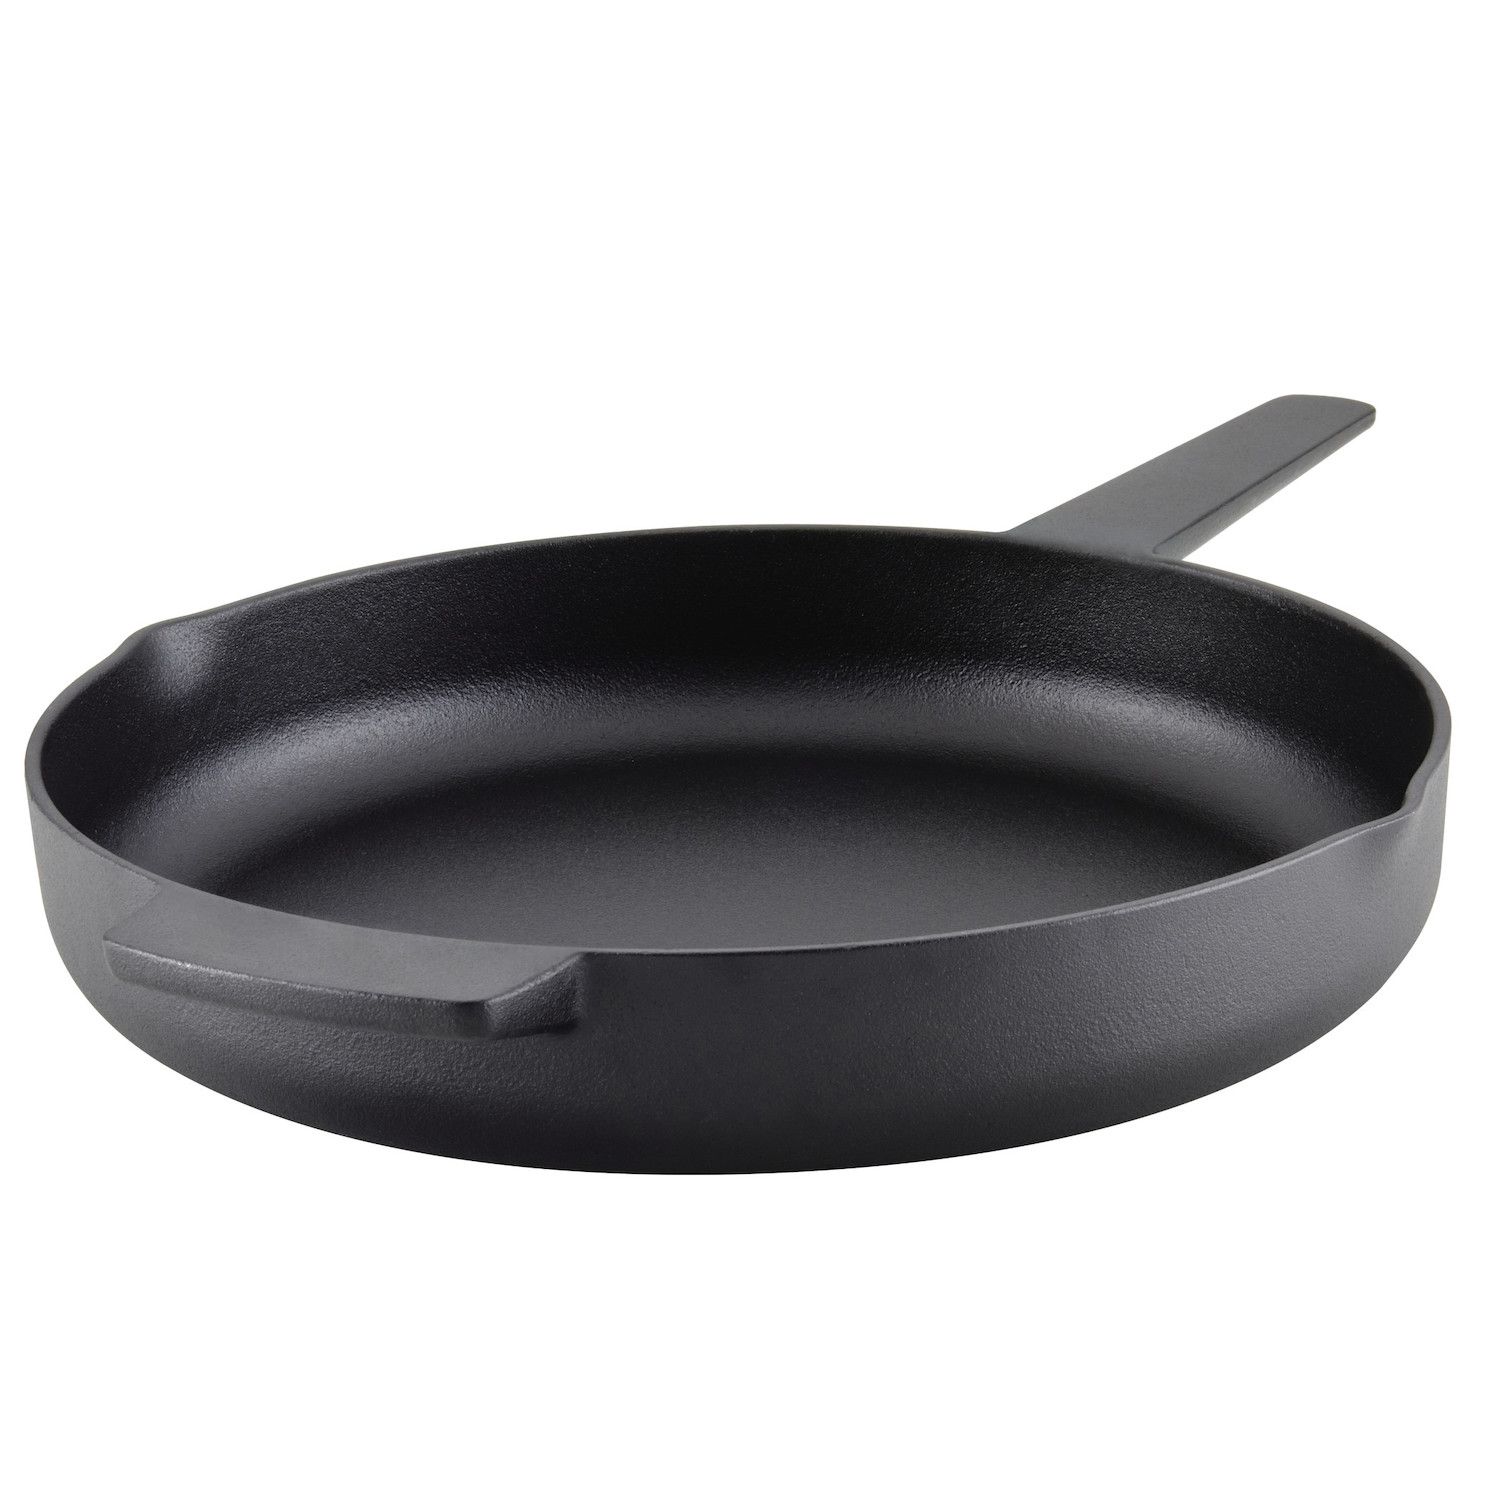 6.25 Shallow Round Cast Iron Frying Pan / Skillet with Handle (1 Skillet)  by MyXOHome, 1 - Harris Teeter